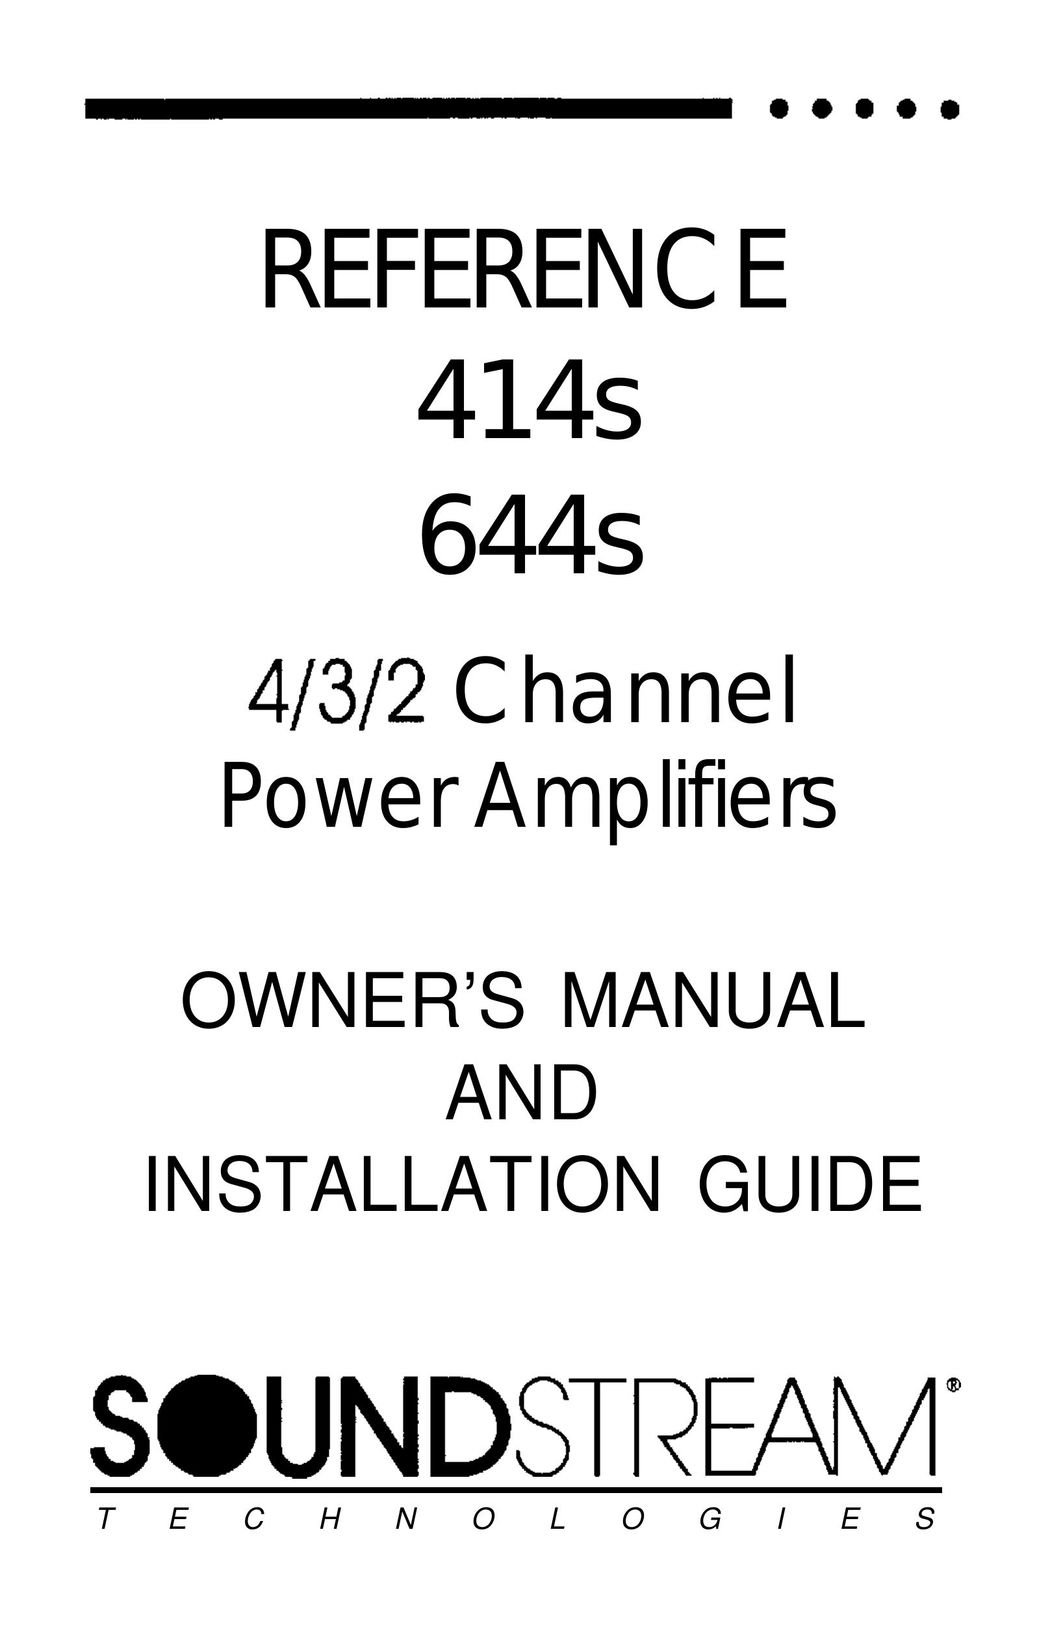 Soundstream Technologies 644s Stereo Amplifier User Manual